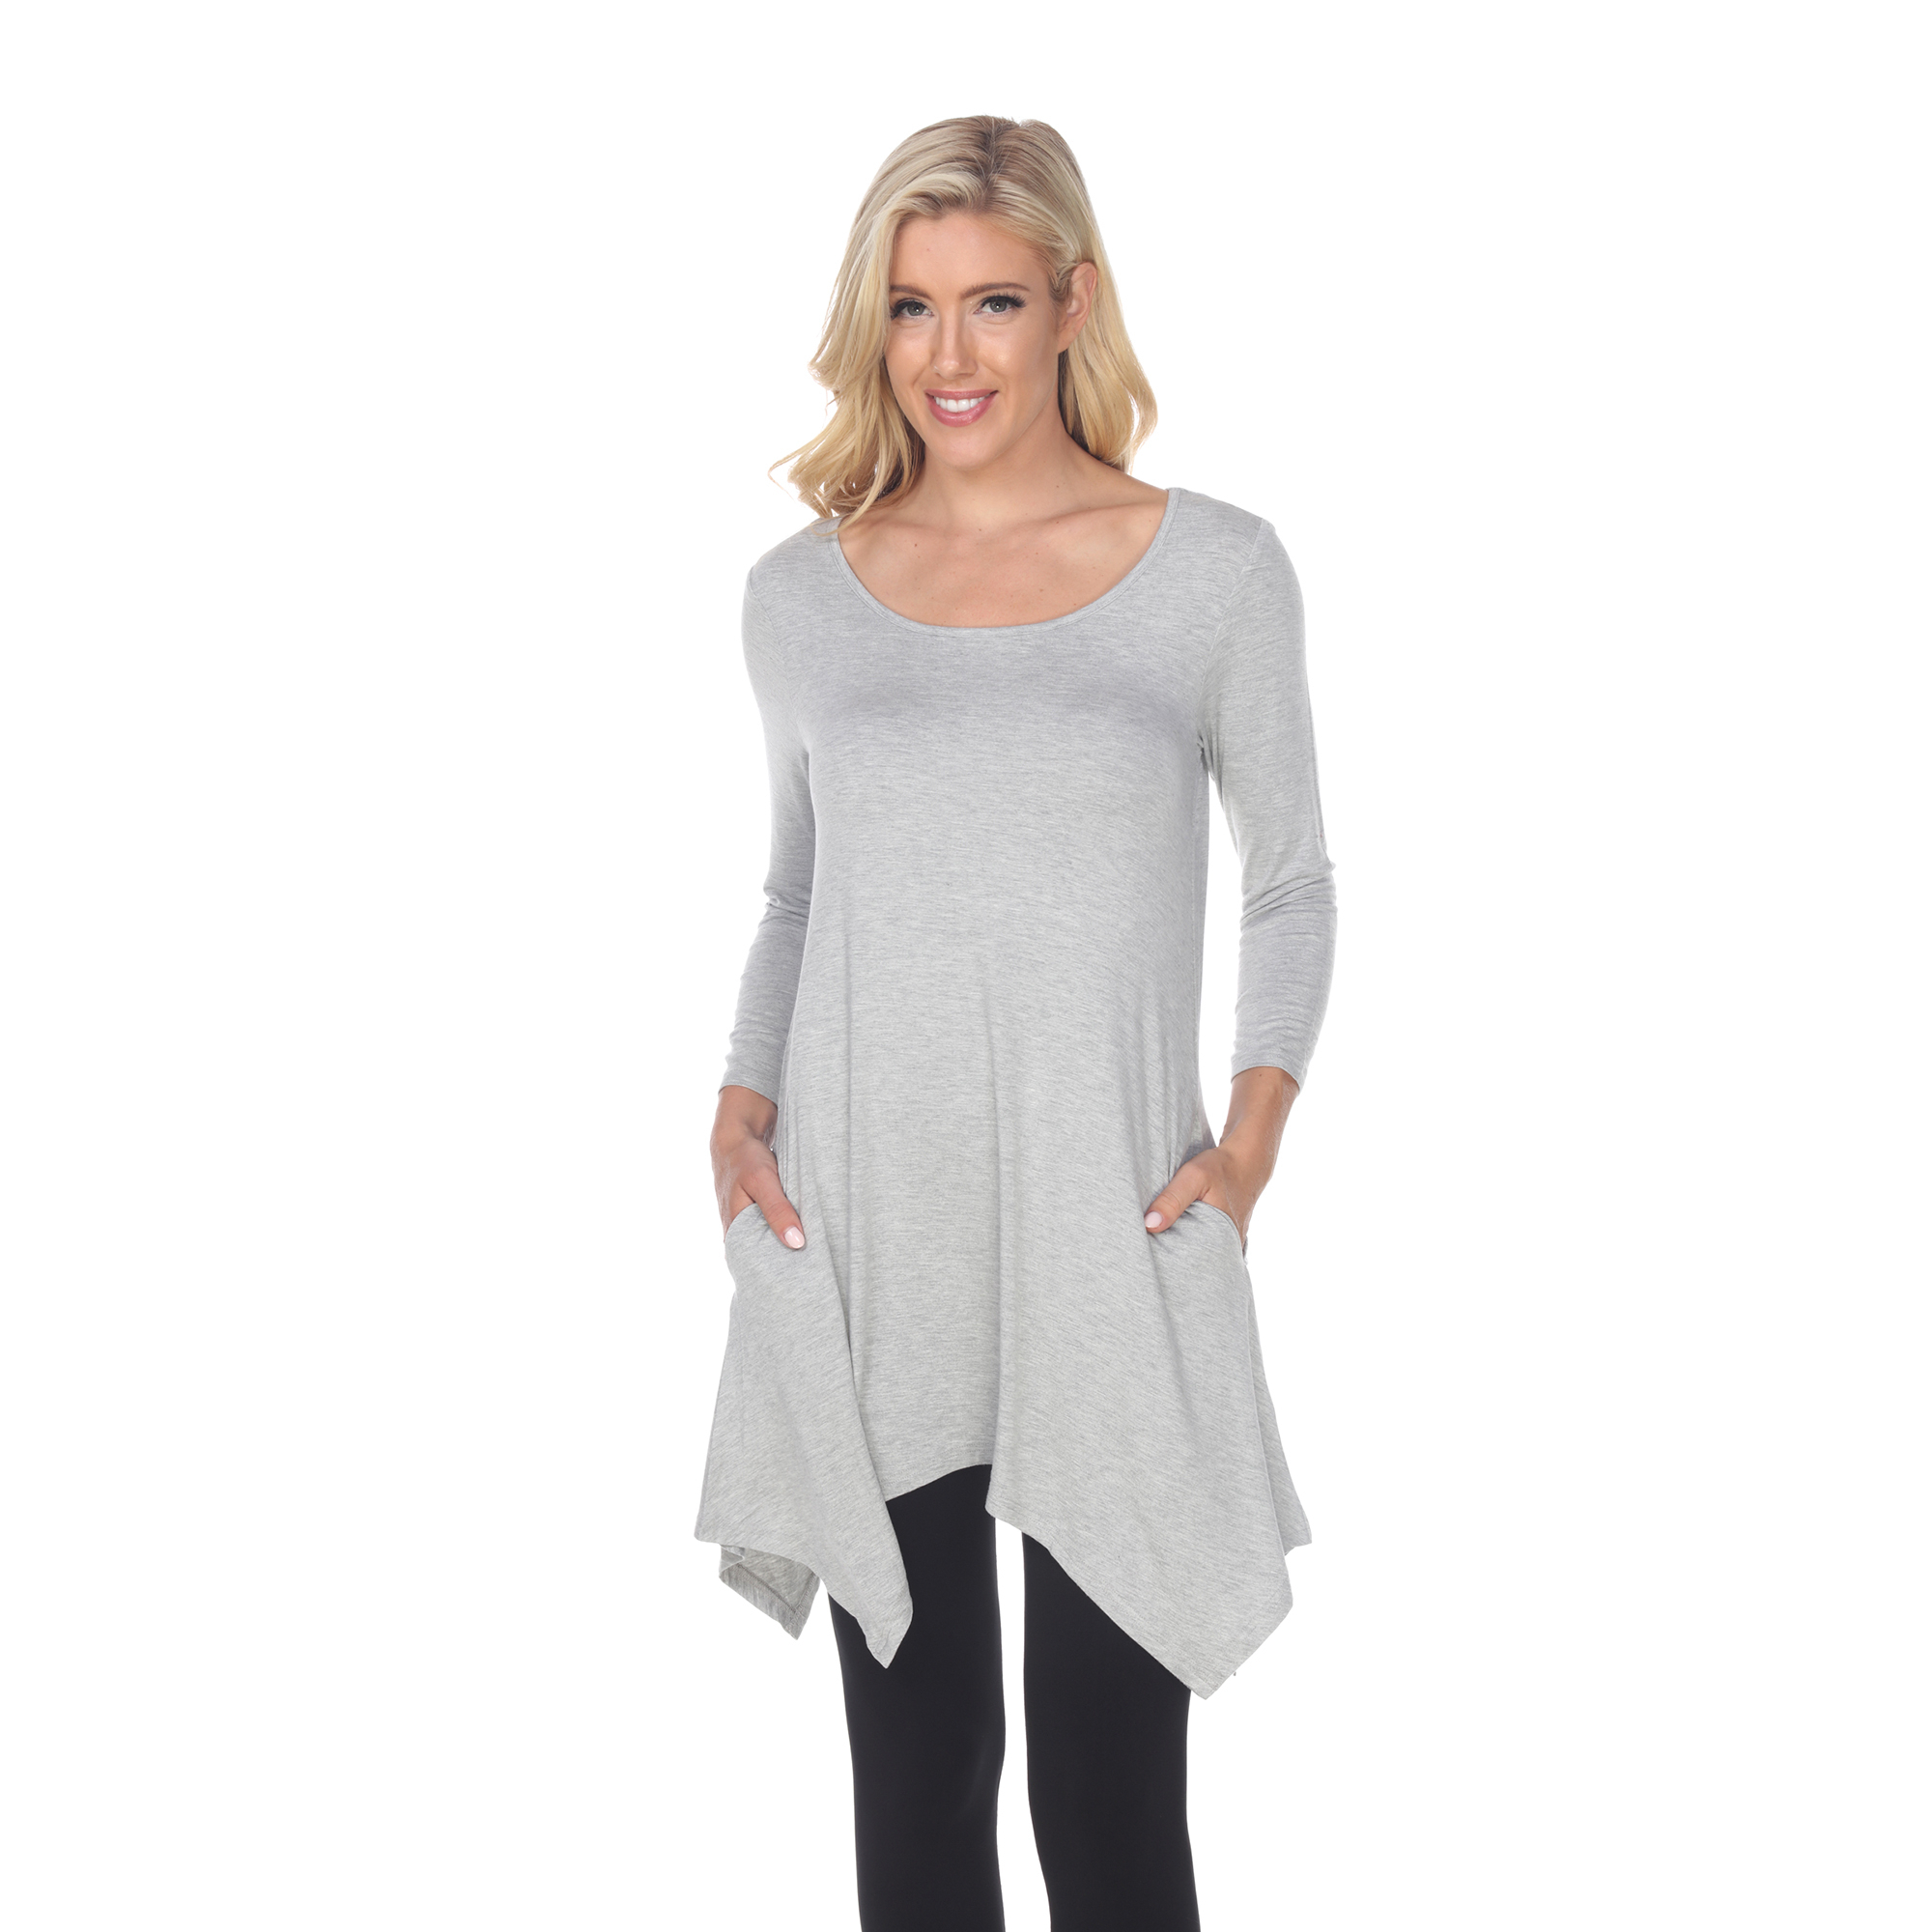 White Mark Women's Quarter Sleeve Tunic Top With Pockets - Heather Grey, X-Large